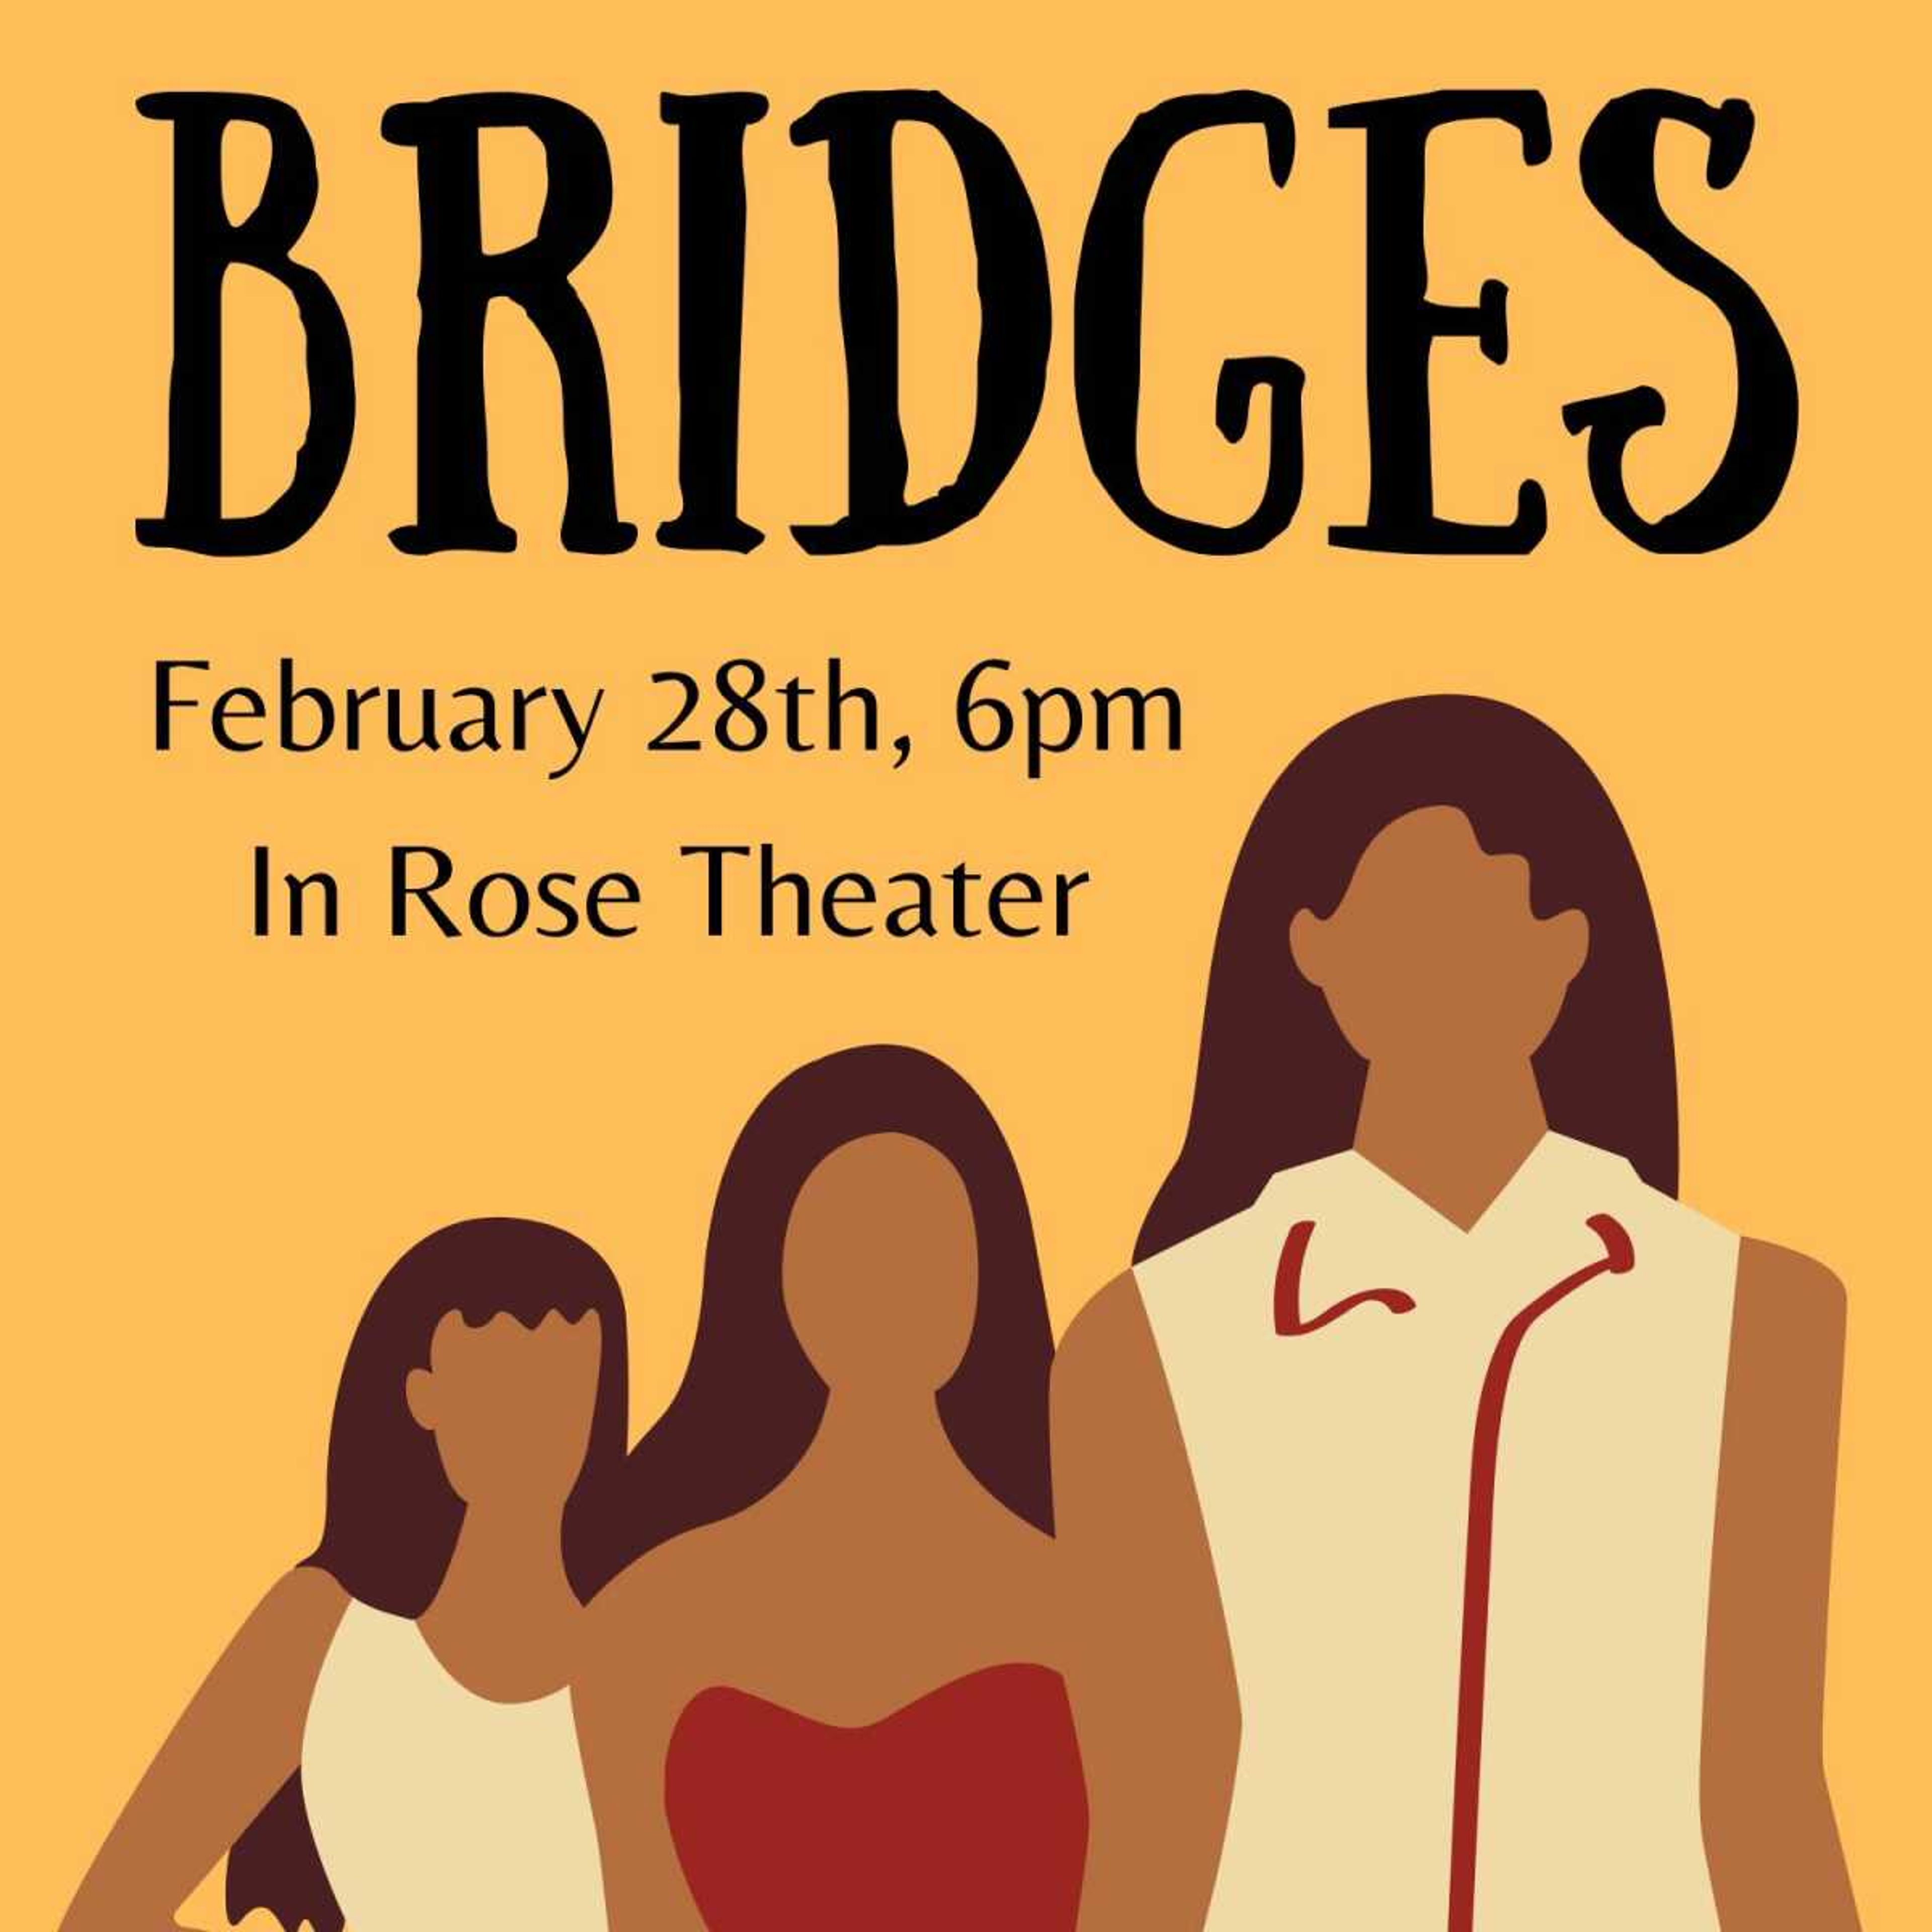 The annual "Bridges" event on Feb. 28 will celebrate Black History Month and Women's History Month with performances from members of the Southeast community. The event begins at 6 p.m. in Rose Theater.